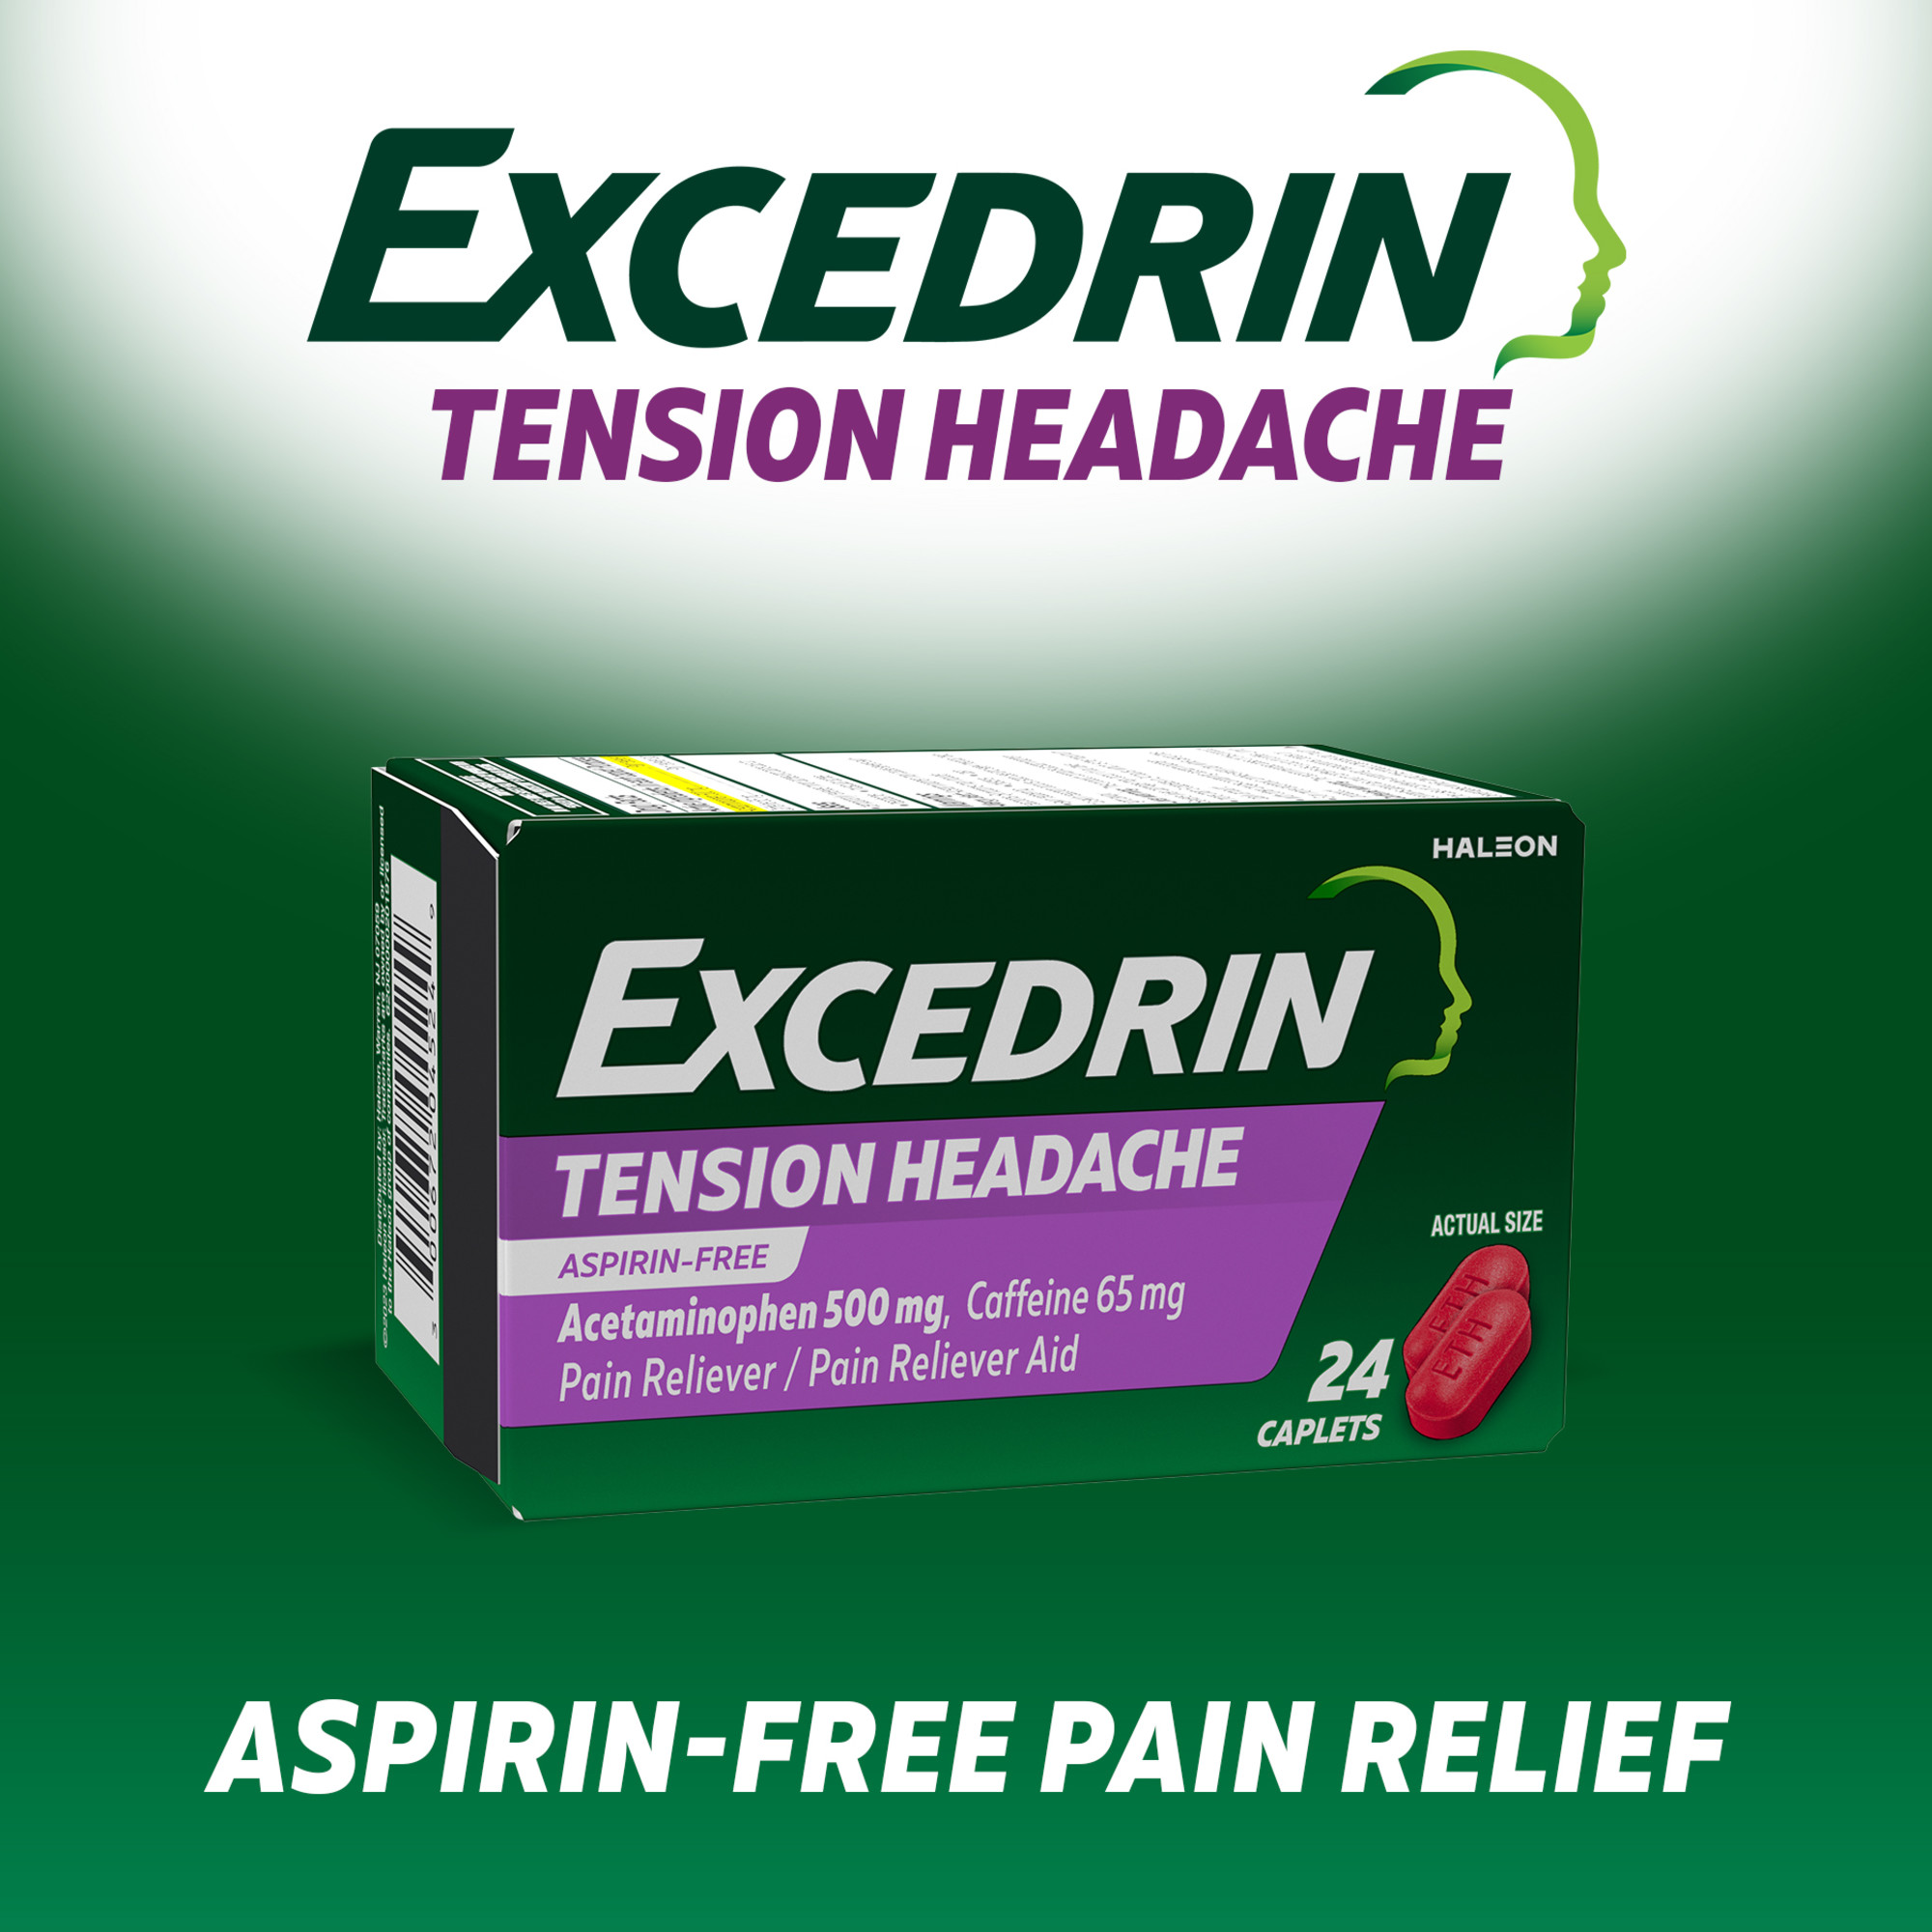 Excedrin Tension Headache Relief Acetaminophen and Caffeine Caplets, 24 Count - image 3 of 10